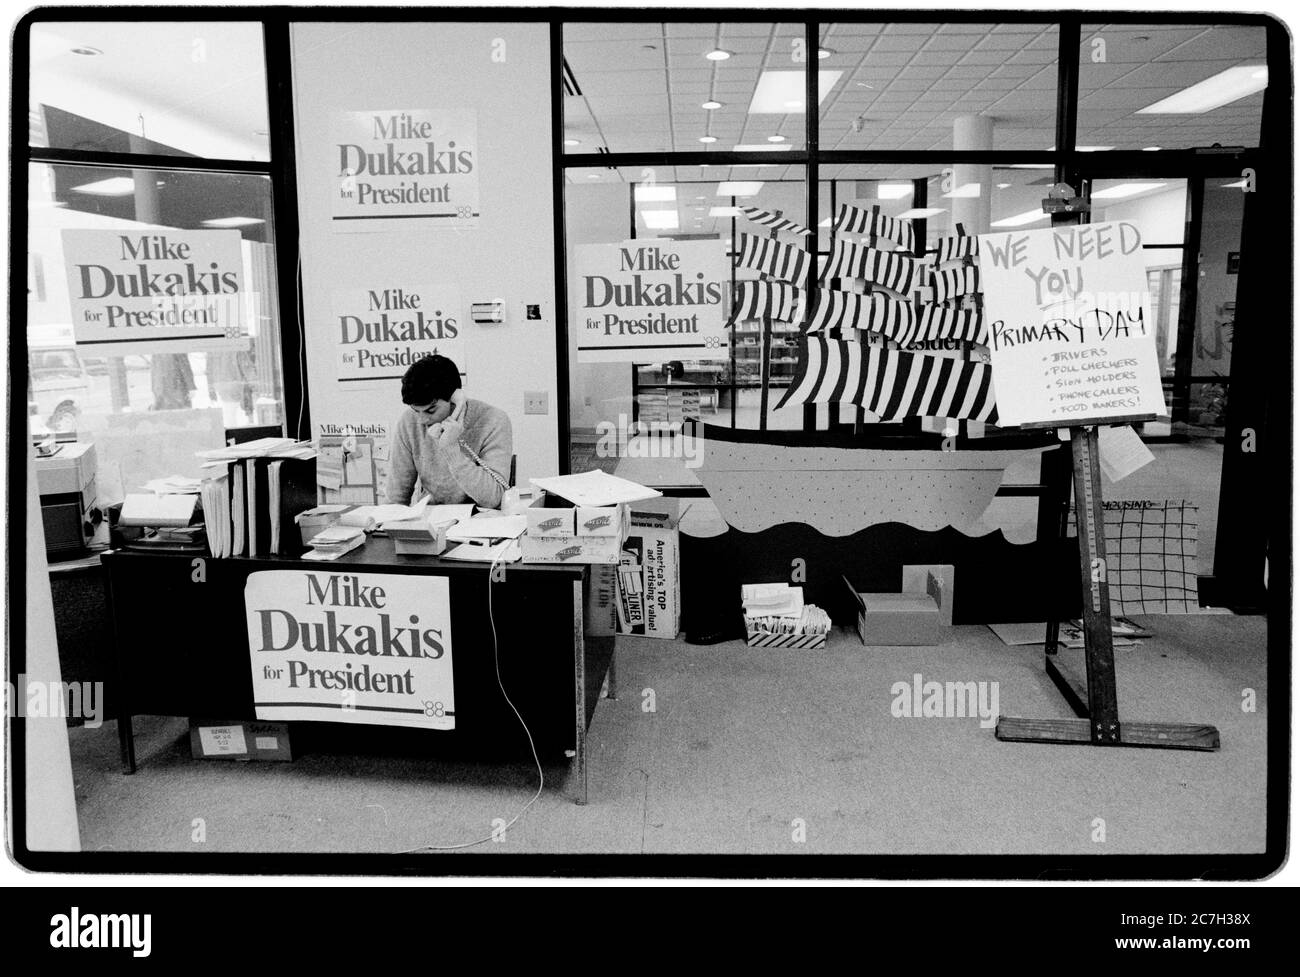 US Presidential Election Campaign 1988 Michael Dukakis, Democratic Candidate  on the campaign trail during the New Hampshire Primaries in February 1988 Campaign workers fill envelopes with election material Stock Photo